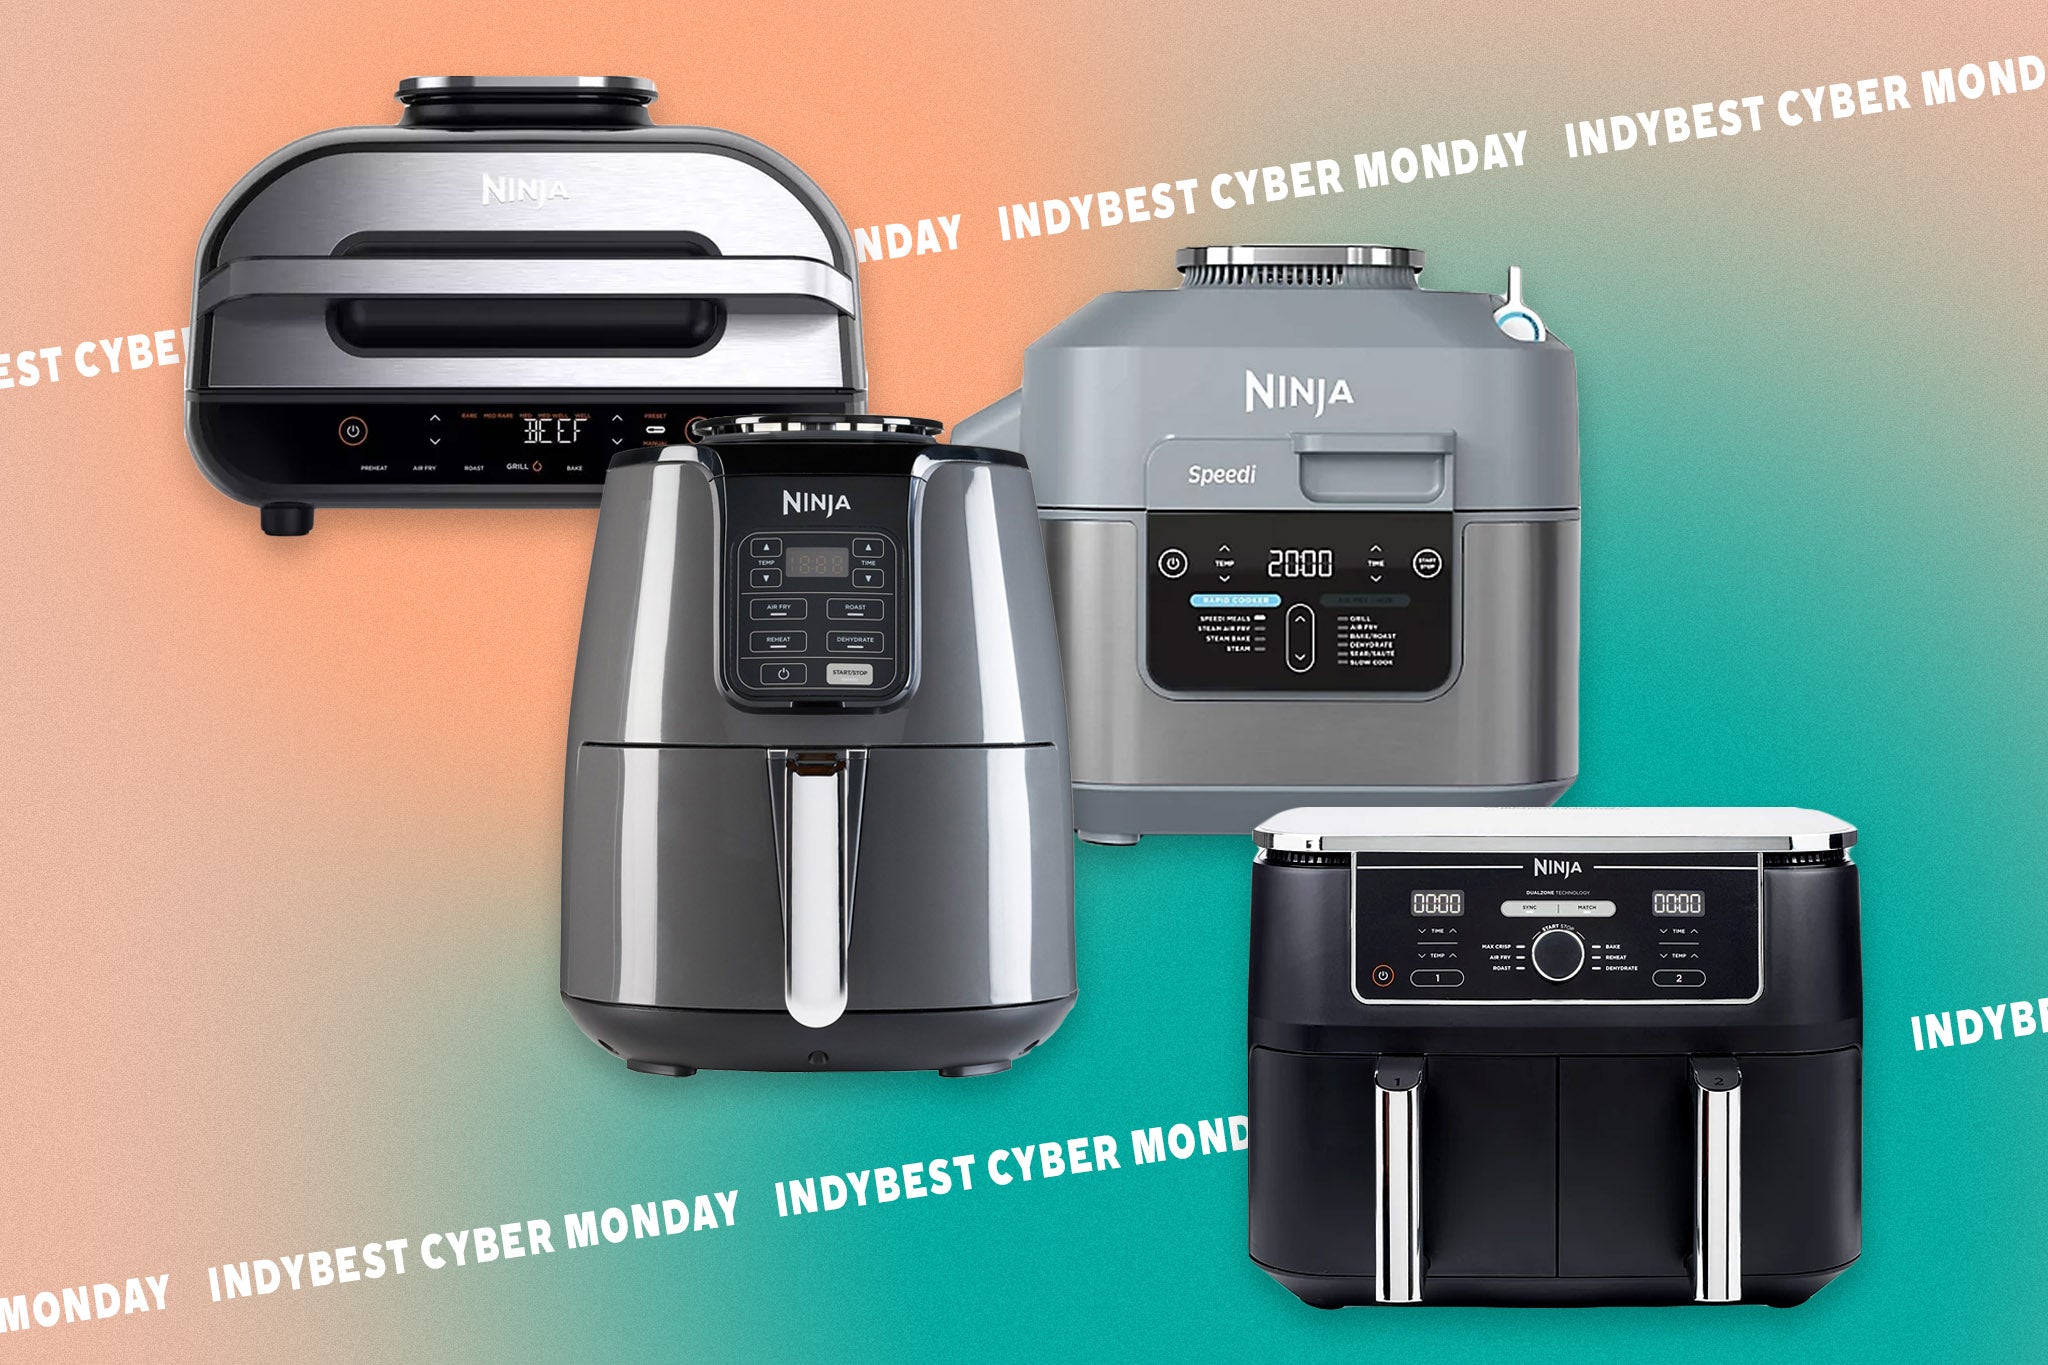 Now’s the time to pick up Ninja’s coveted appliances for less